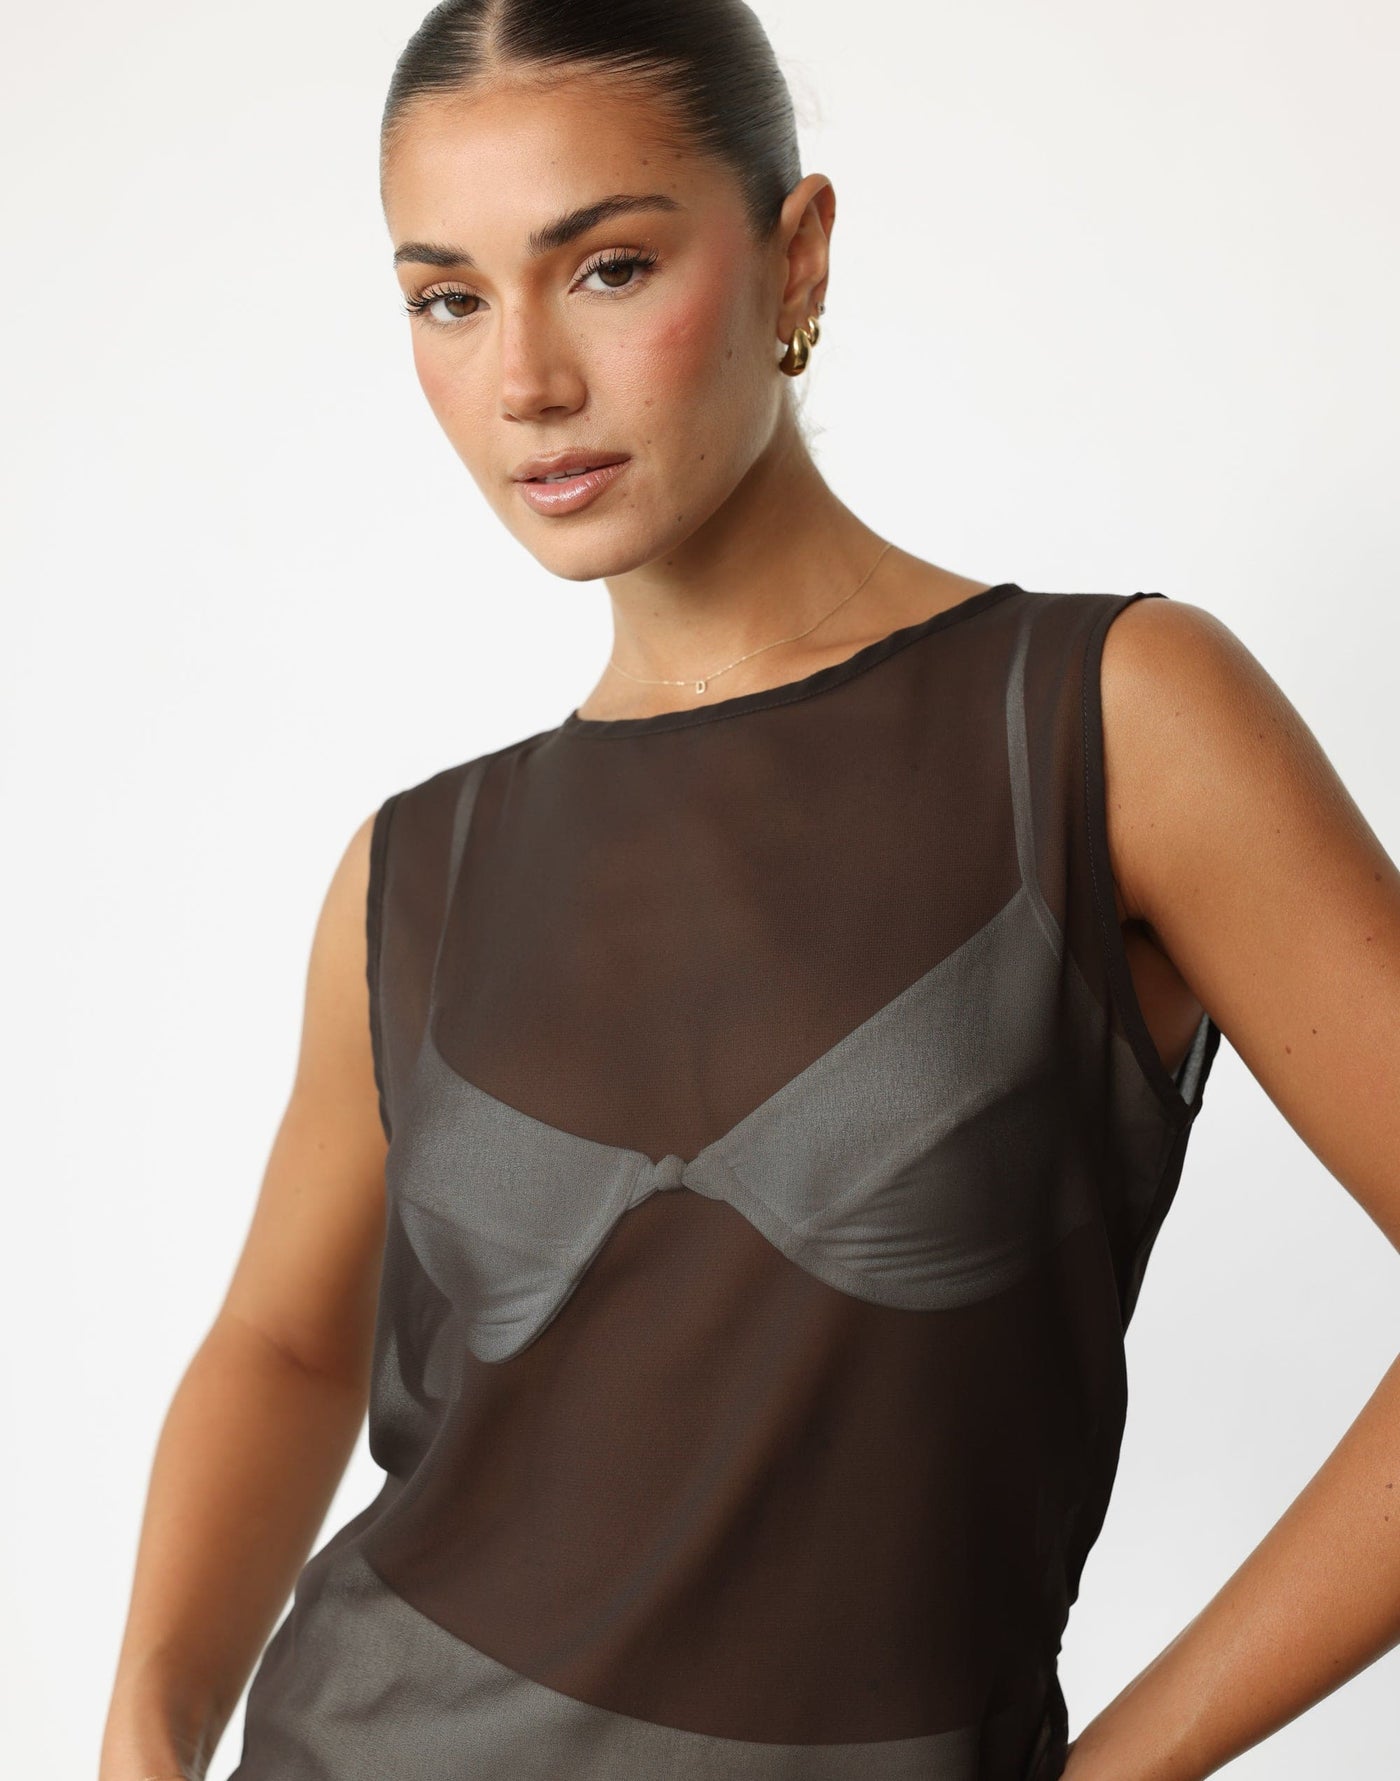 Angelo Top (Chocolate) | CHARCOAL Exclusive - Sheer Asymmetrical Hem Top - Women's Top - Charcoal Clothing